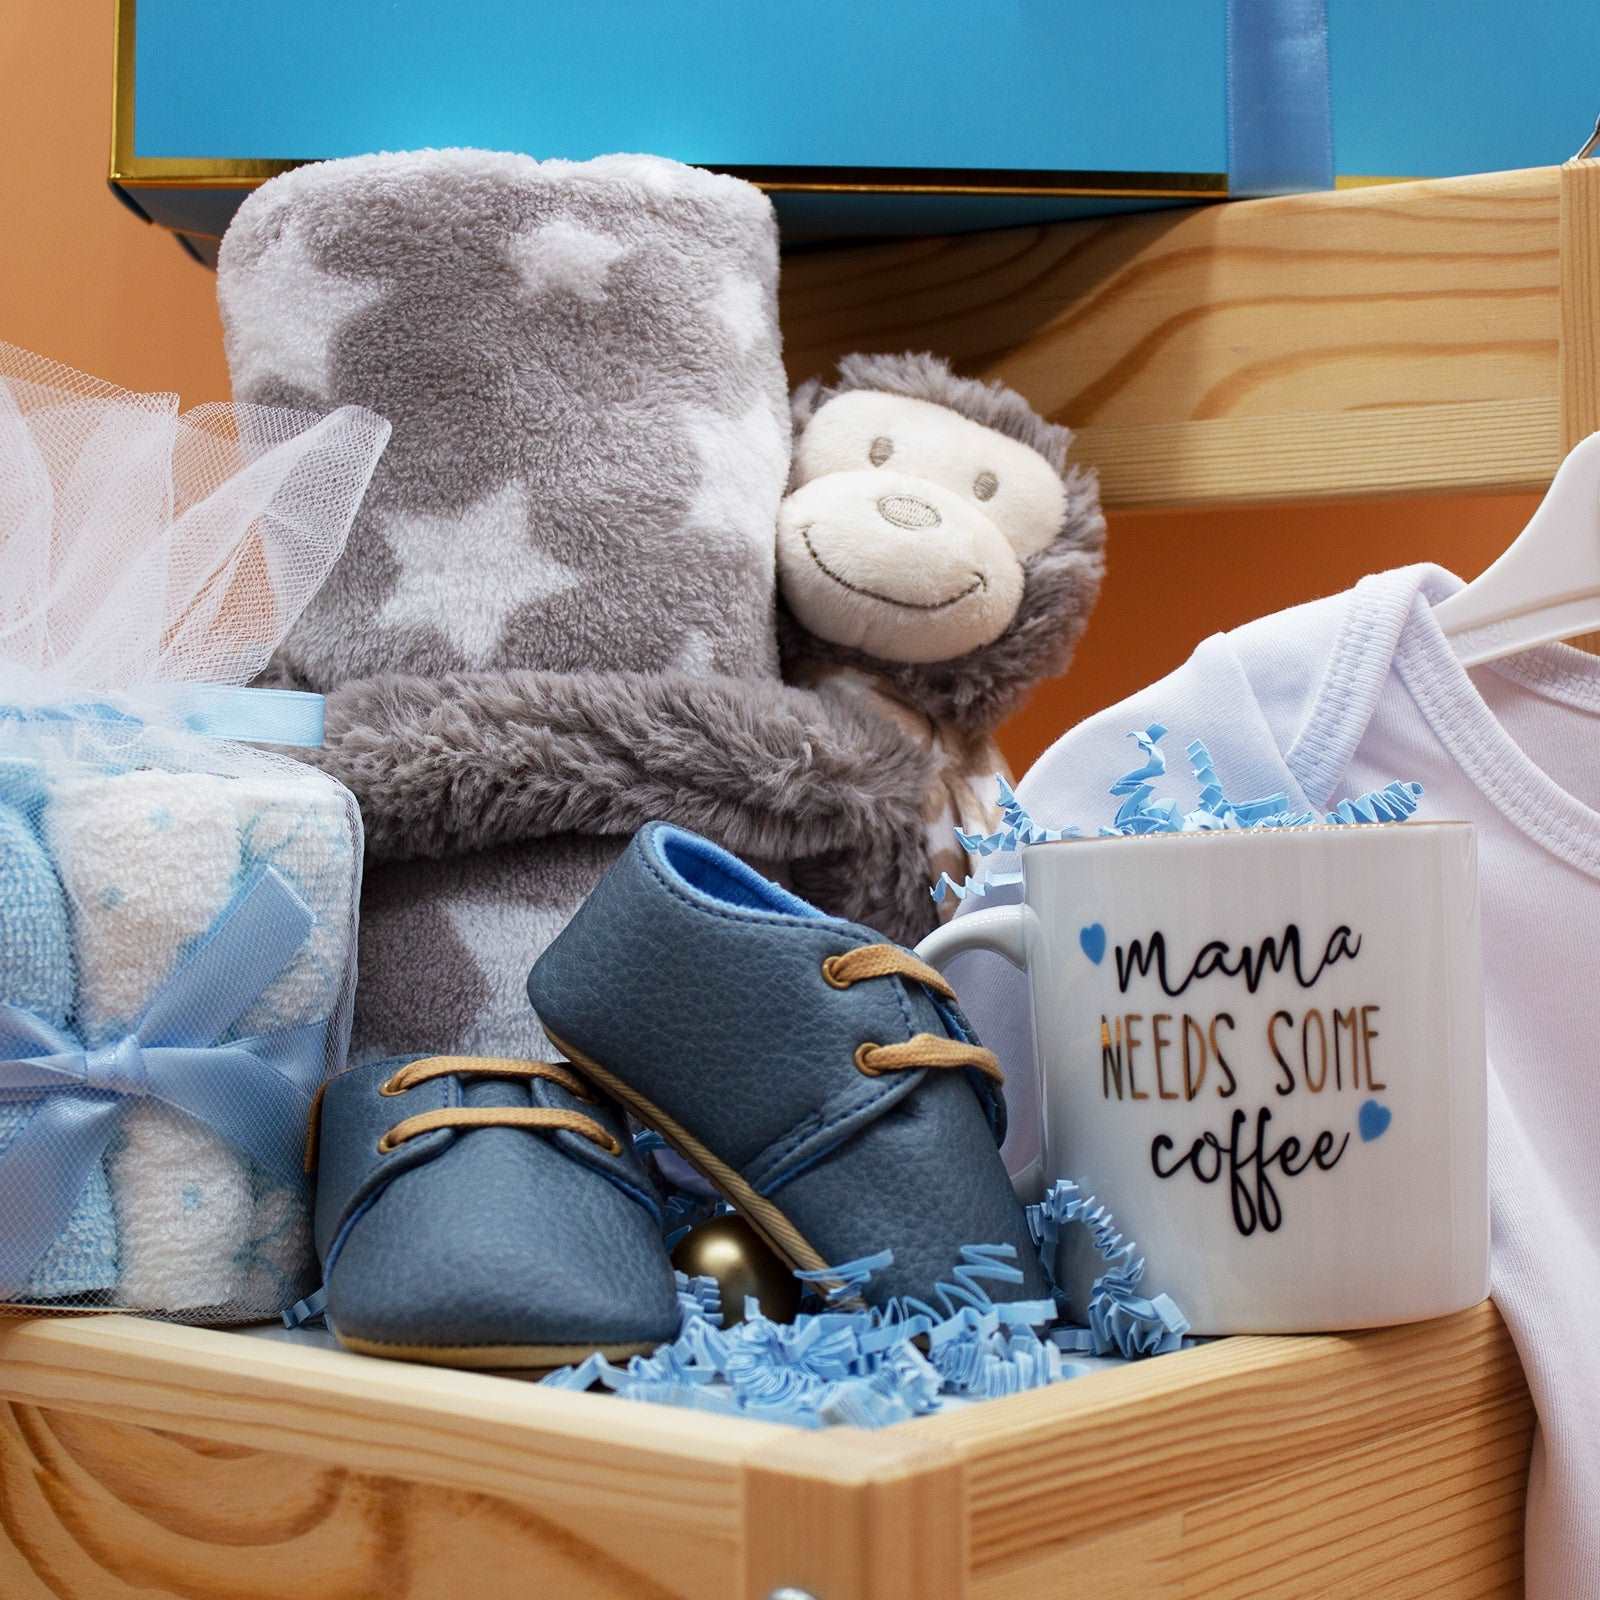 Hellobox Gifts for Newborns with Baby Blanket, Cuddly Toy